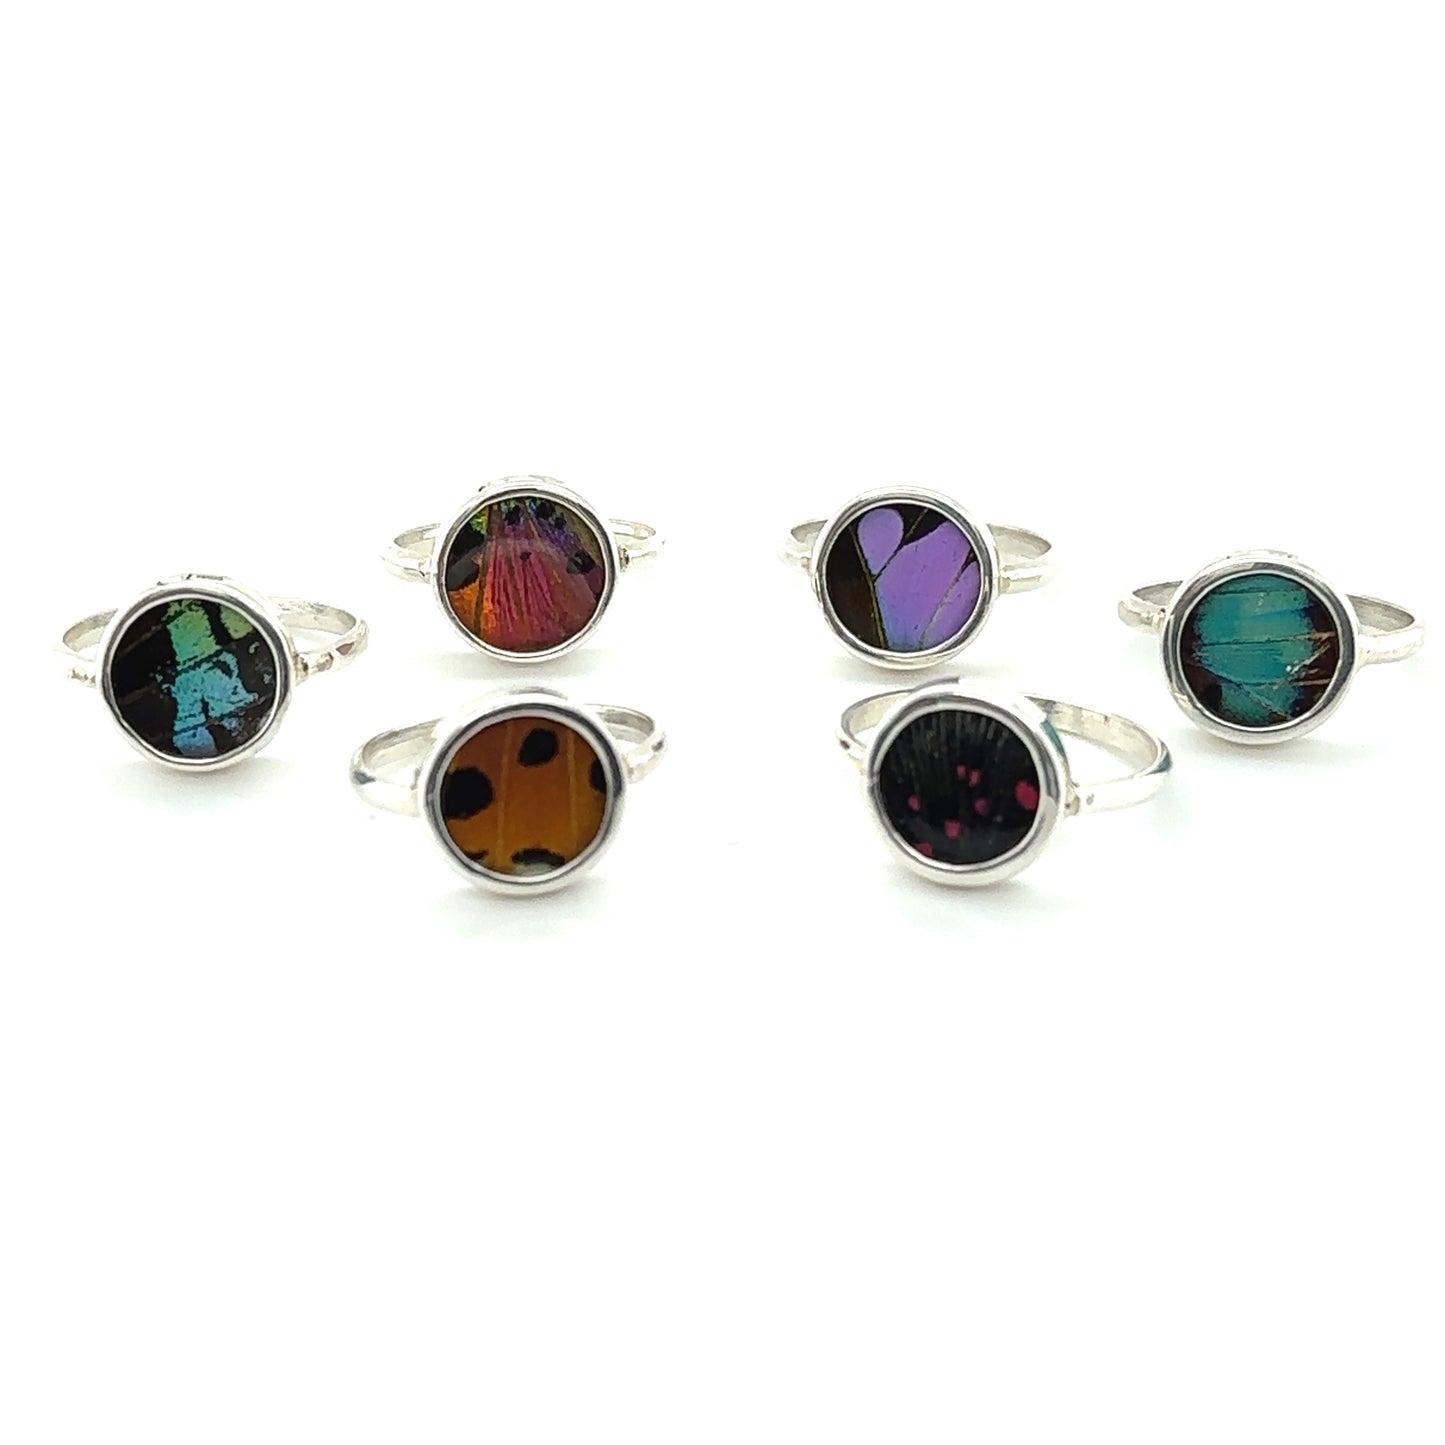 A set of Butterfly Wing Rings in Circle Shape with statement boho-inspired colored glass stones.